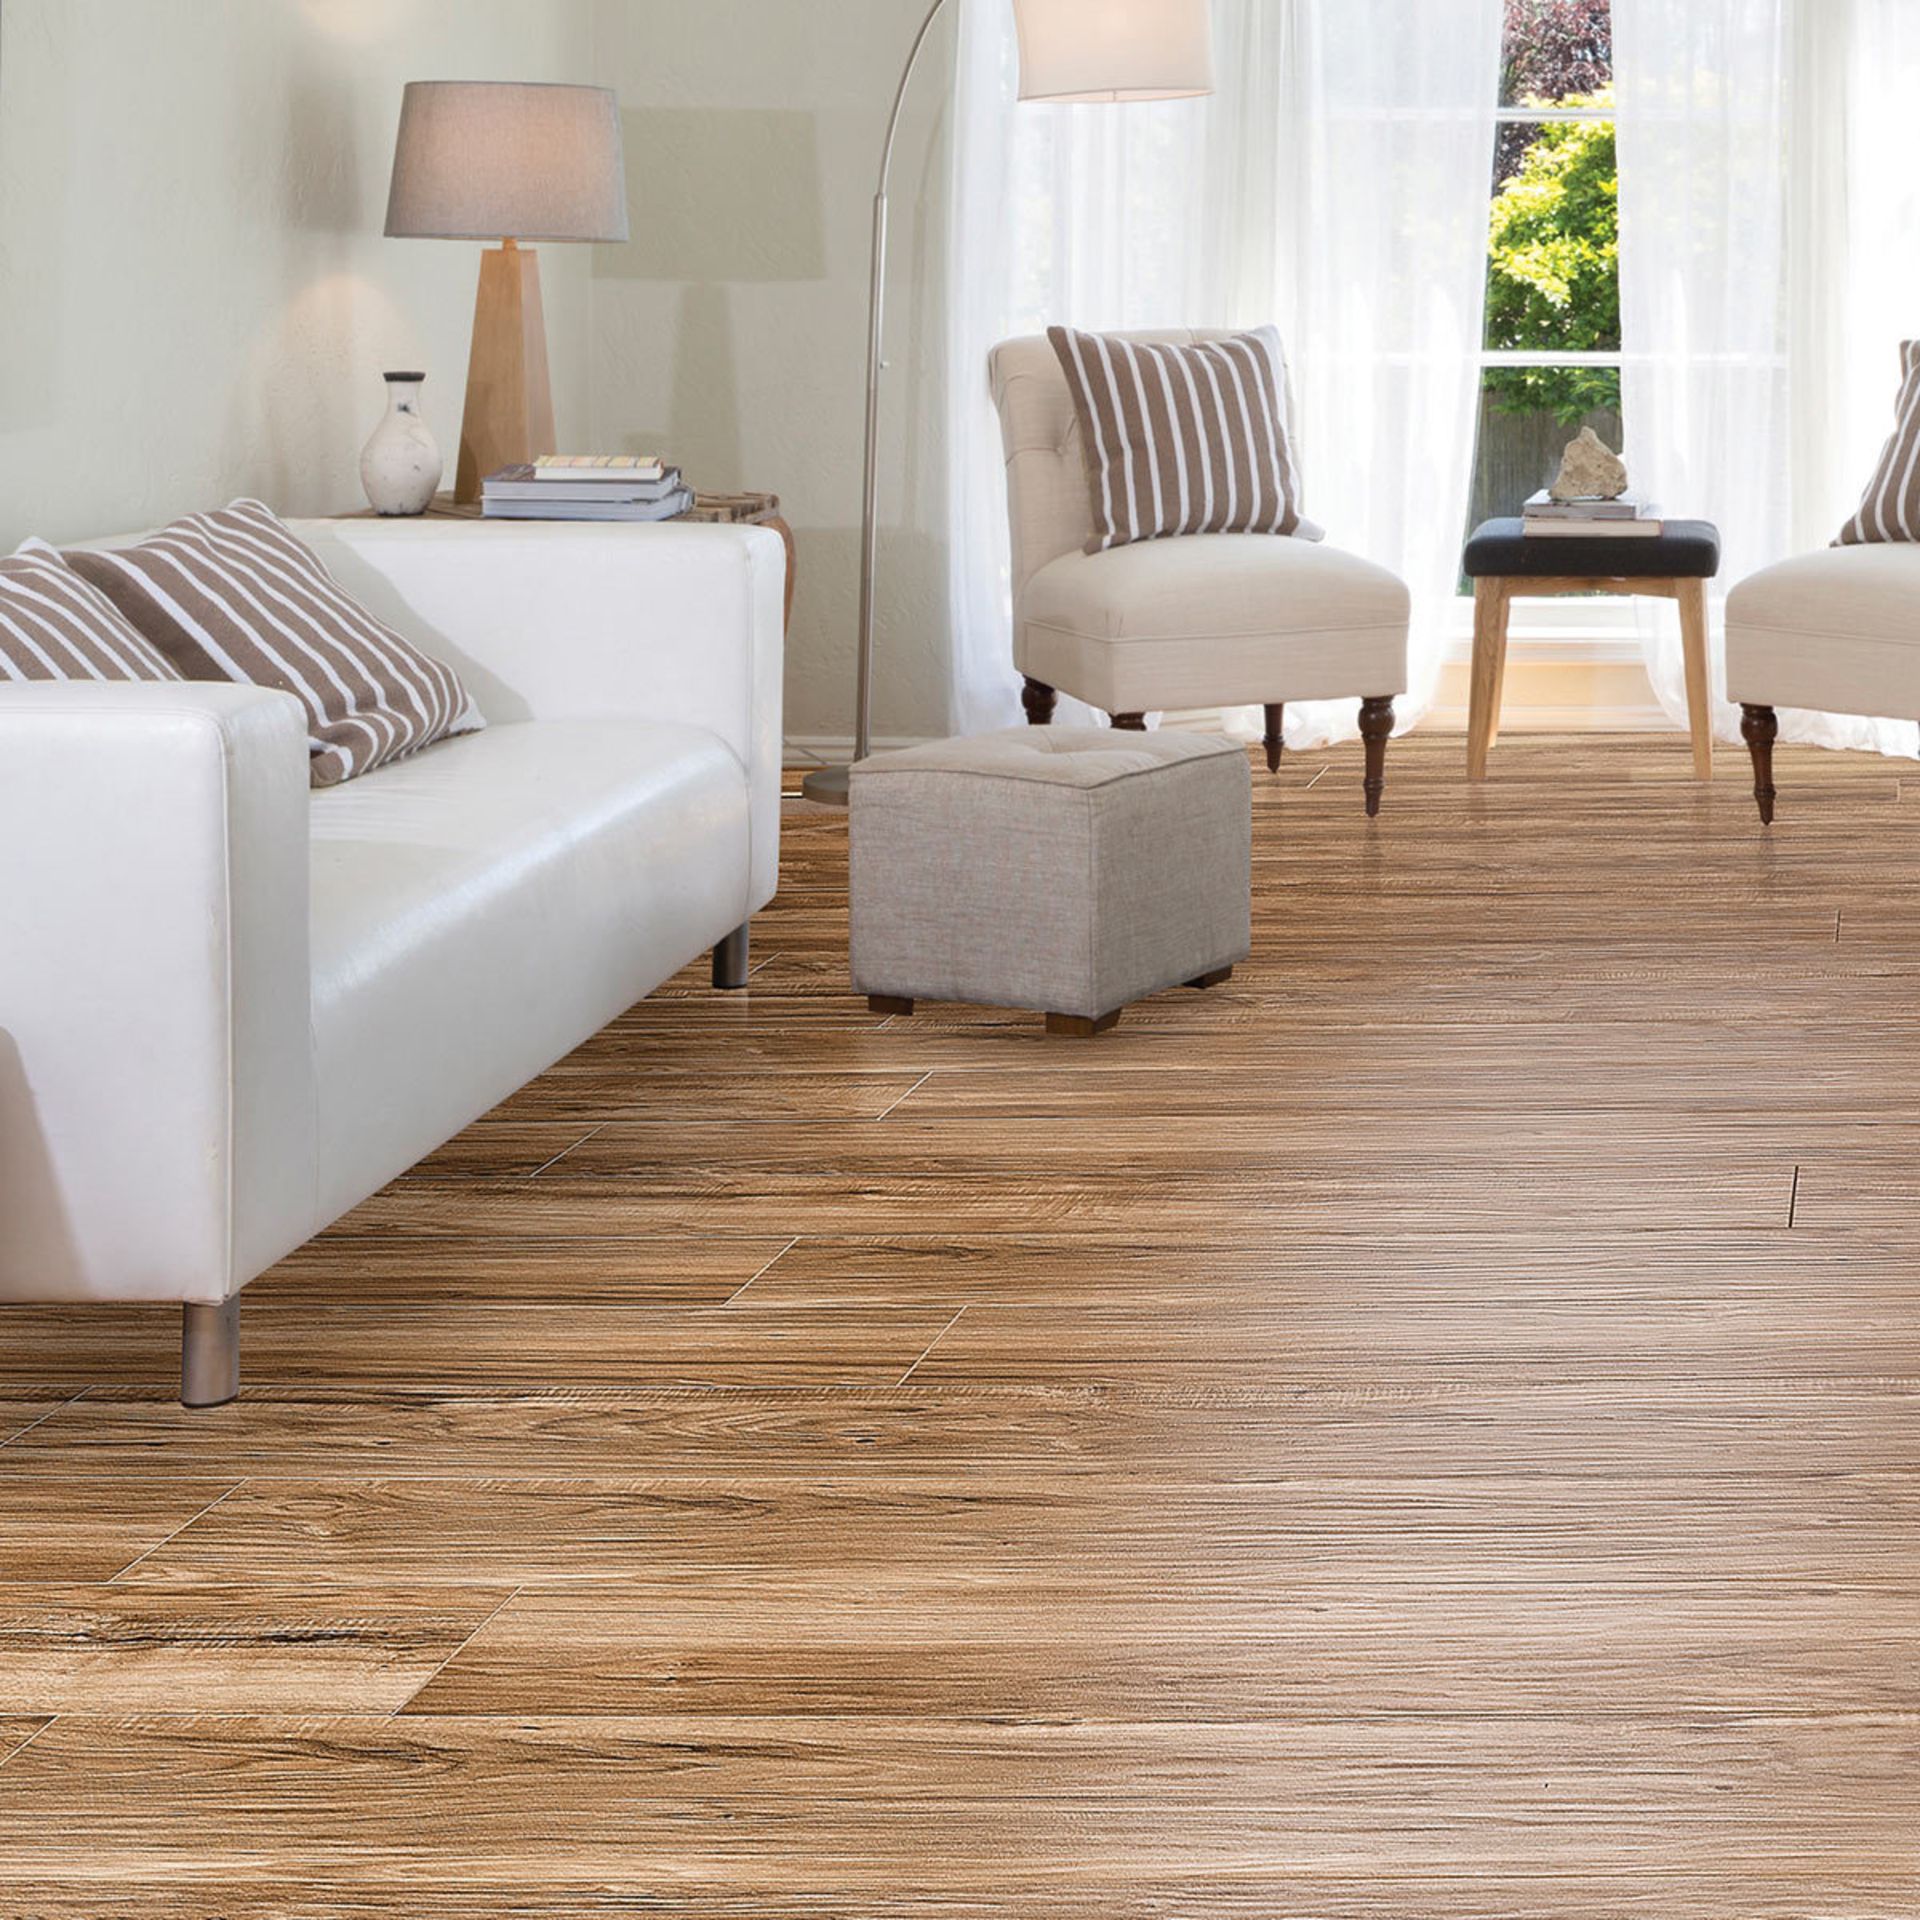 1 BOXED GOLDEN SELECT LAMINATE FLOORING IN TOLEDO WALNUT (COVERS APPROXIMATELY 1.162m2 PER BOX) - Image 2 of 2